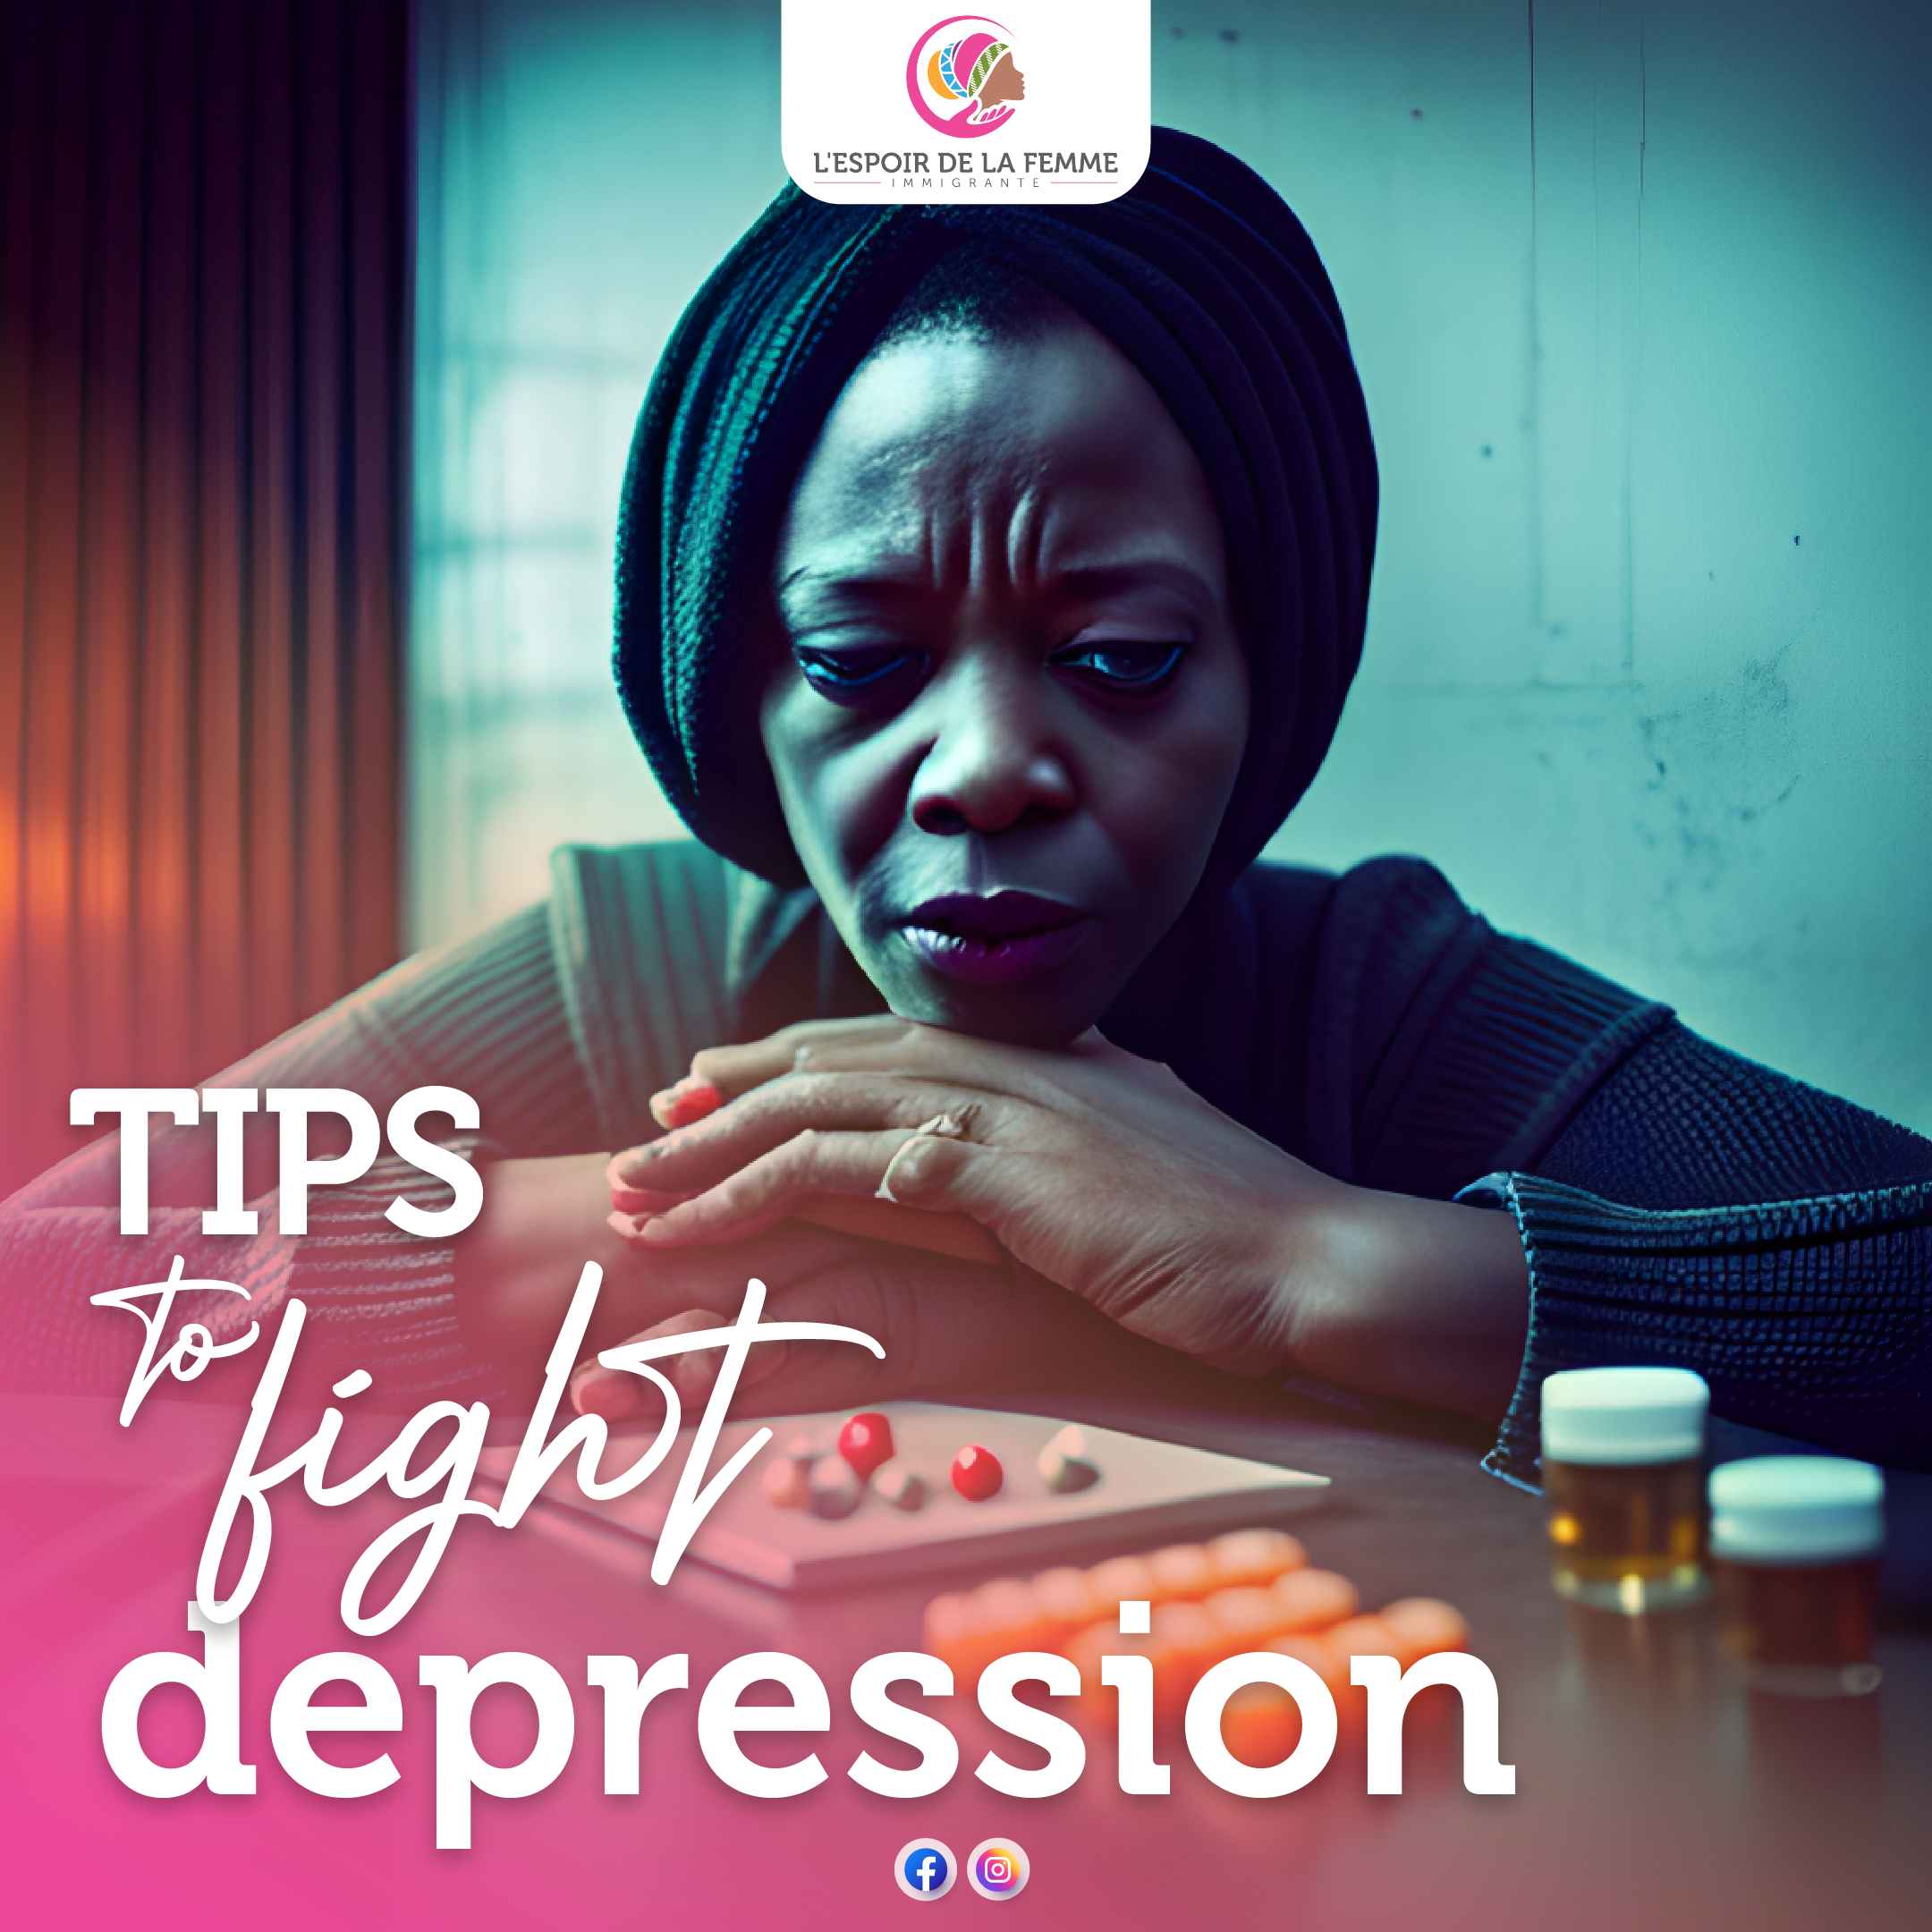 TIPS TO FIGHT DEPRESSION: Finding the light